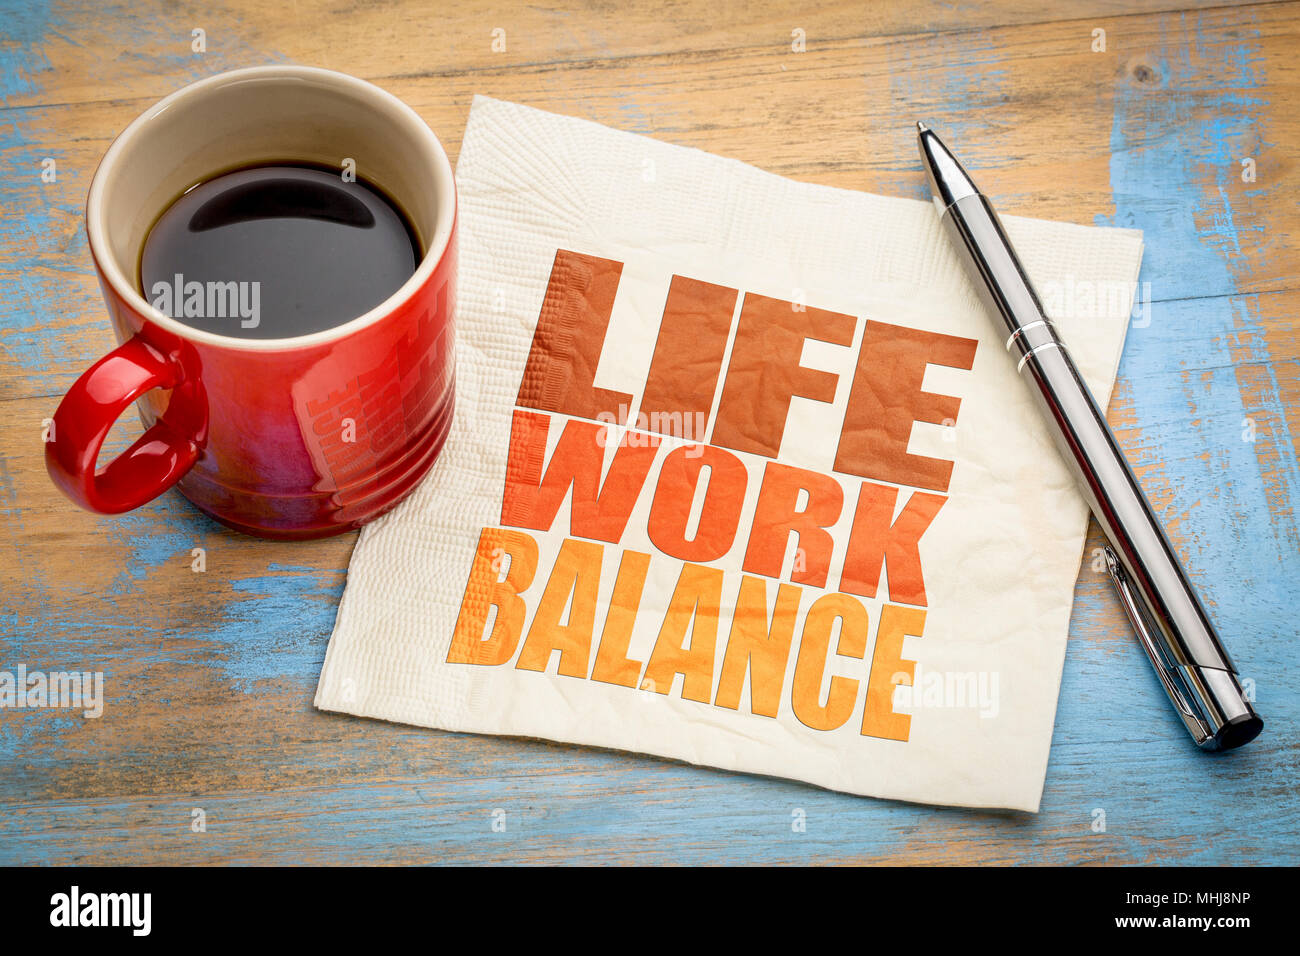 life work balance concept - word abstract on a napkin with a cup of  coffee Stock Photo